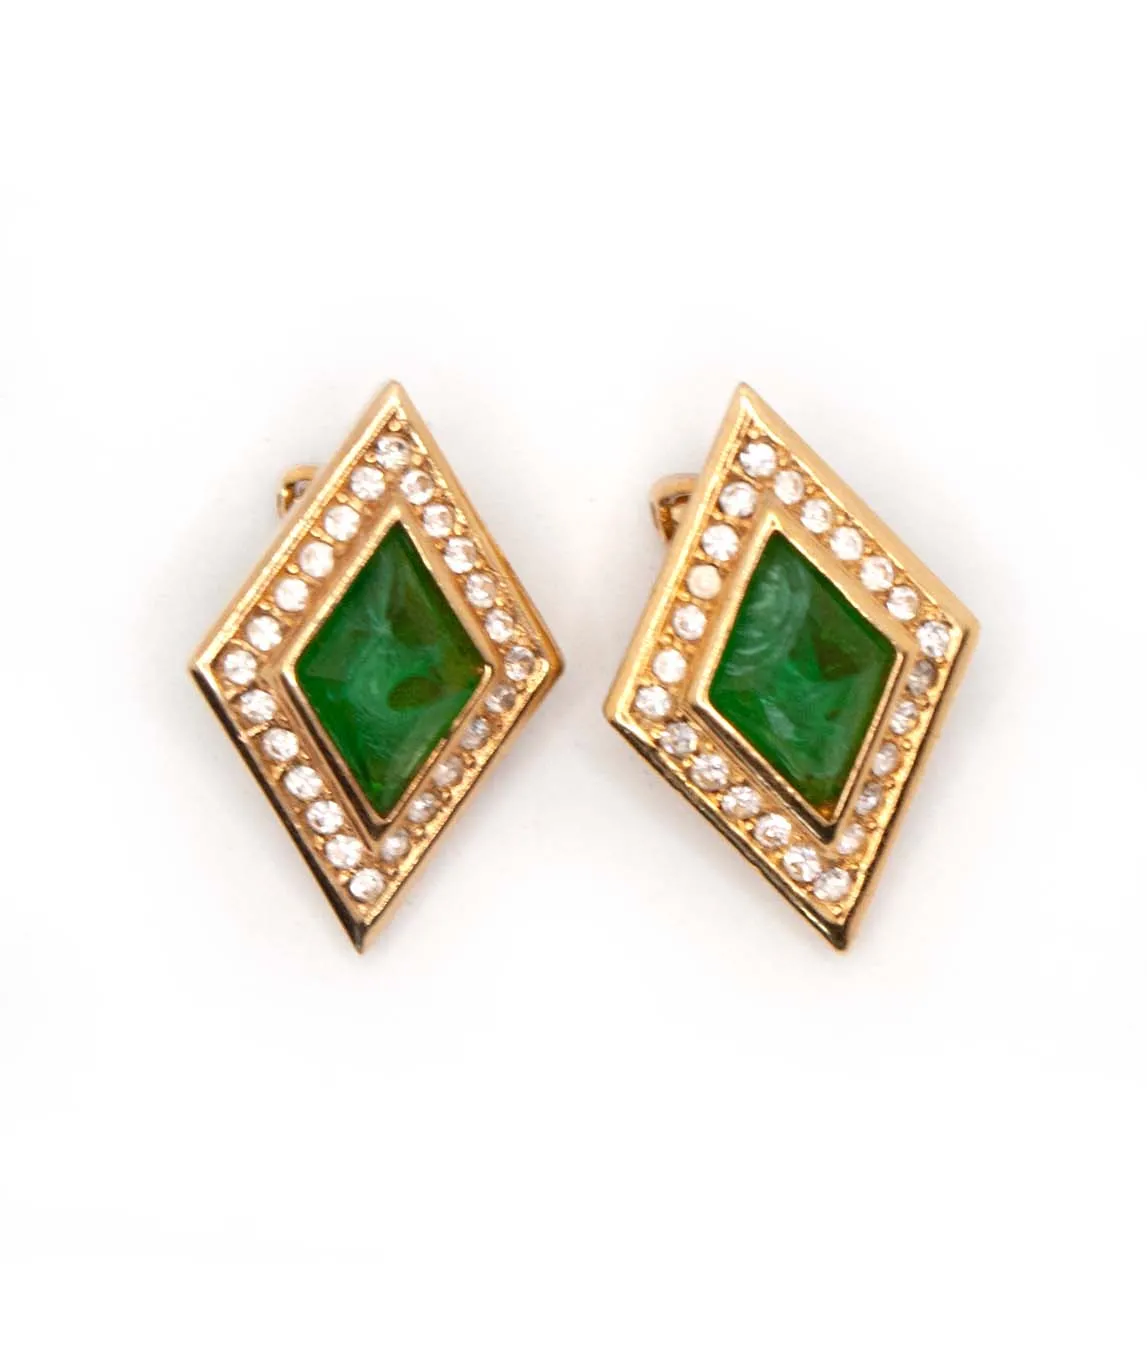 Vintage Christian Dior clip earrings with flawed emerald art glass and rhinestones